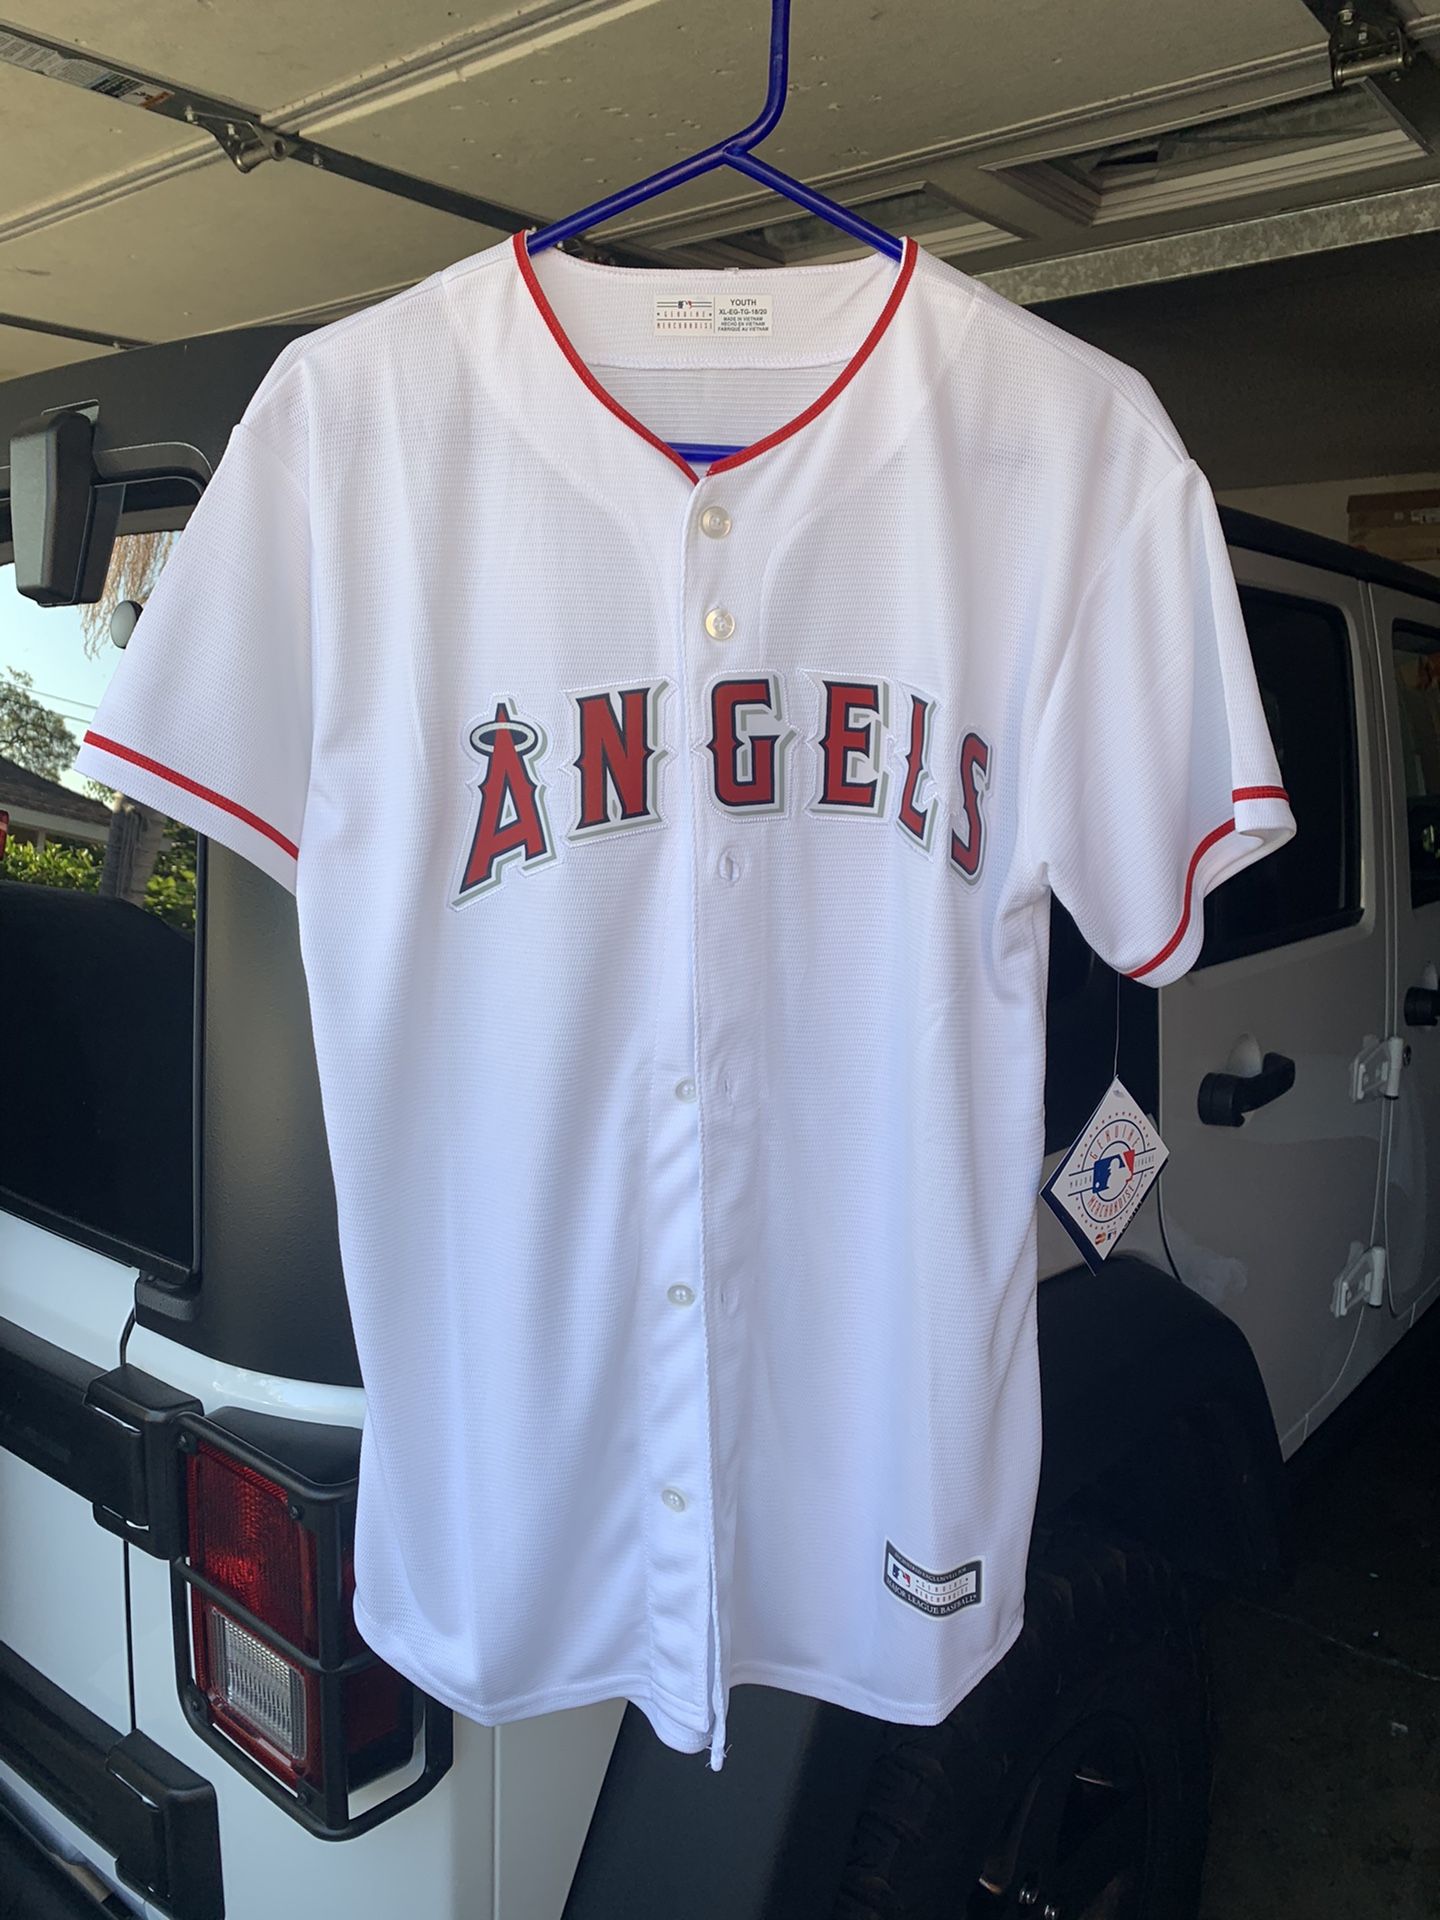 Anaheim Angels Baseball Jersey for Sale in Santa Ana, CA - OfferUp